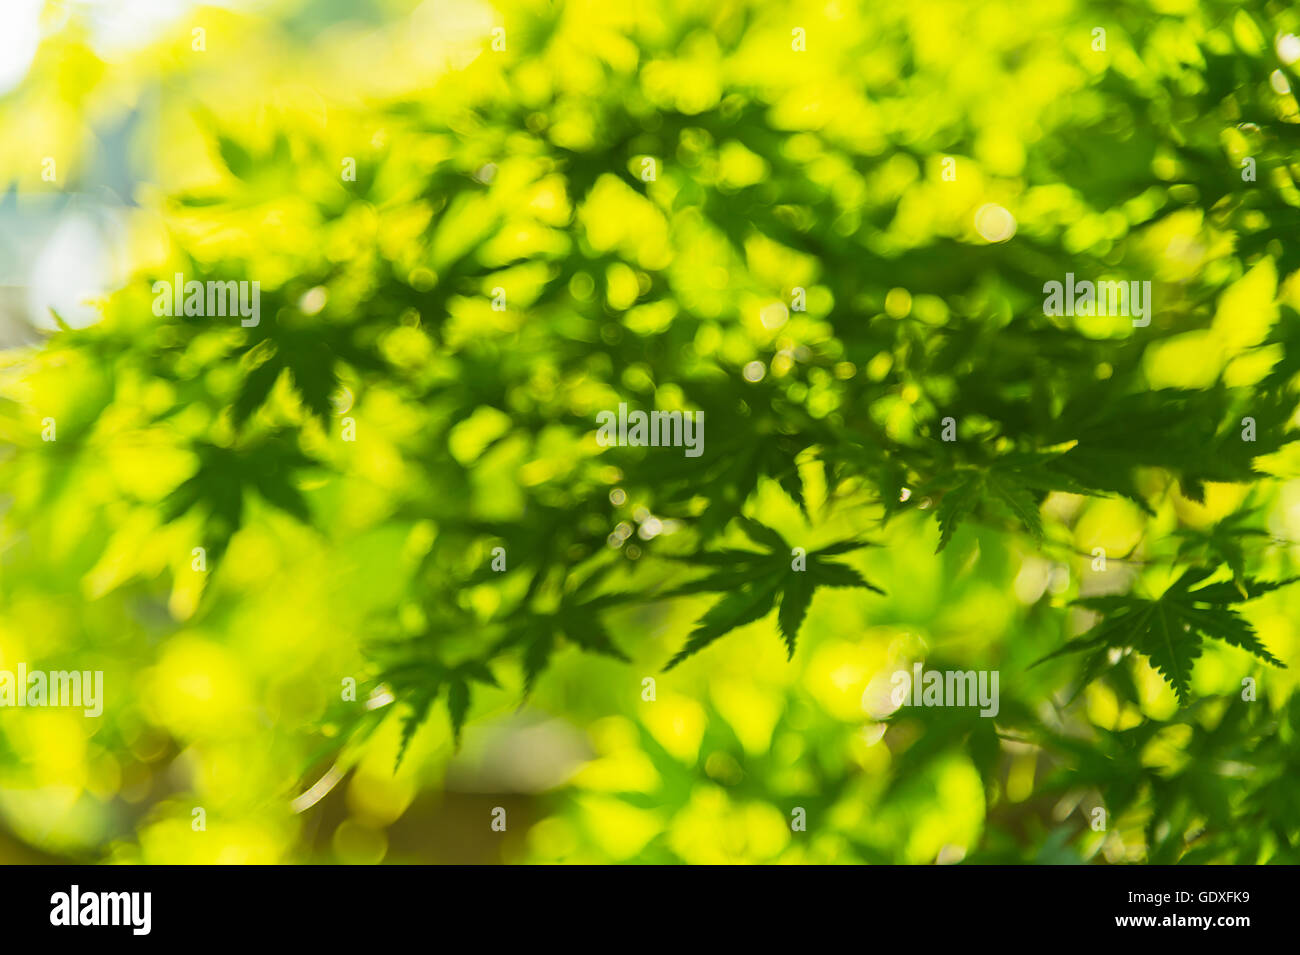 Blurred green maple leaves Stock Photo